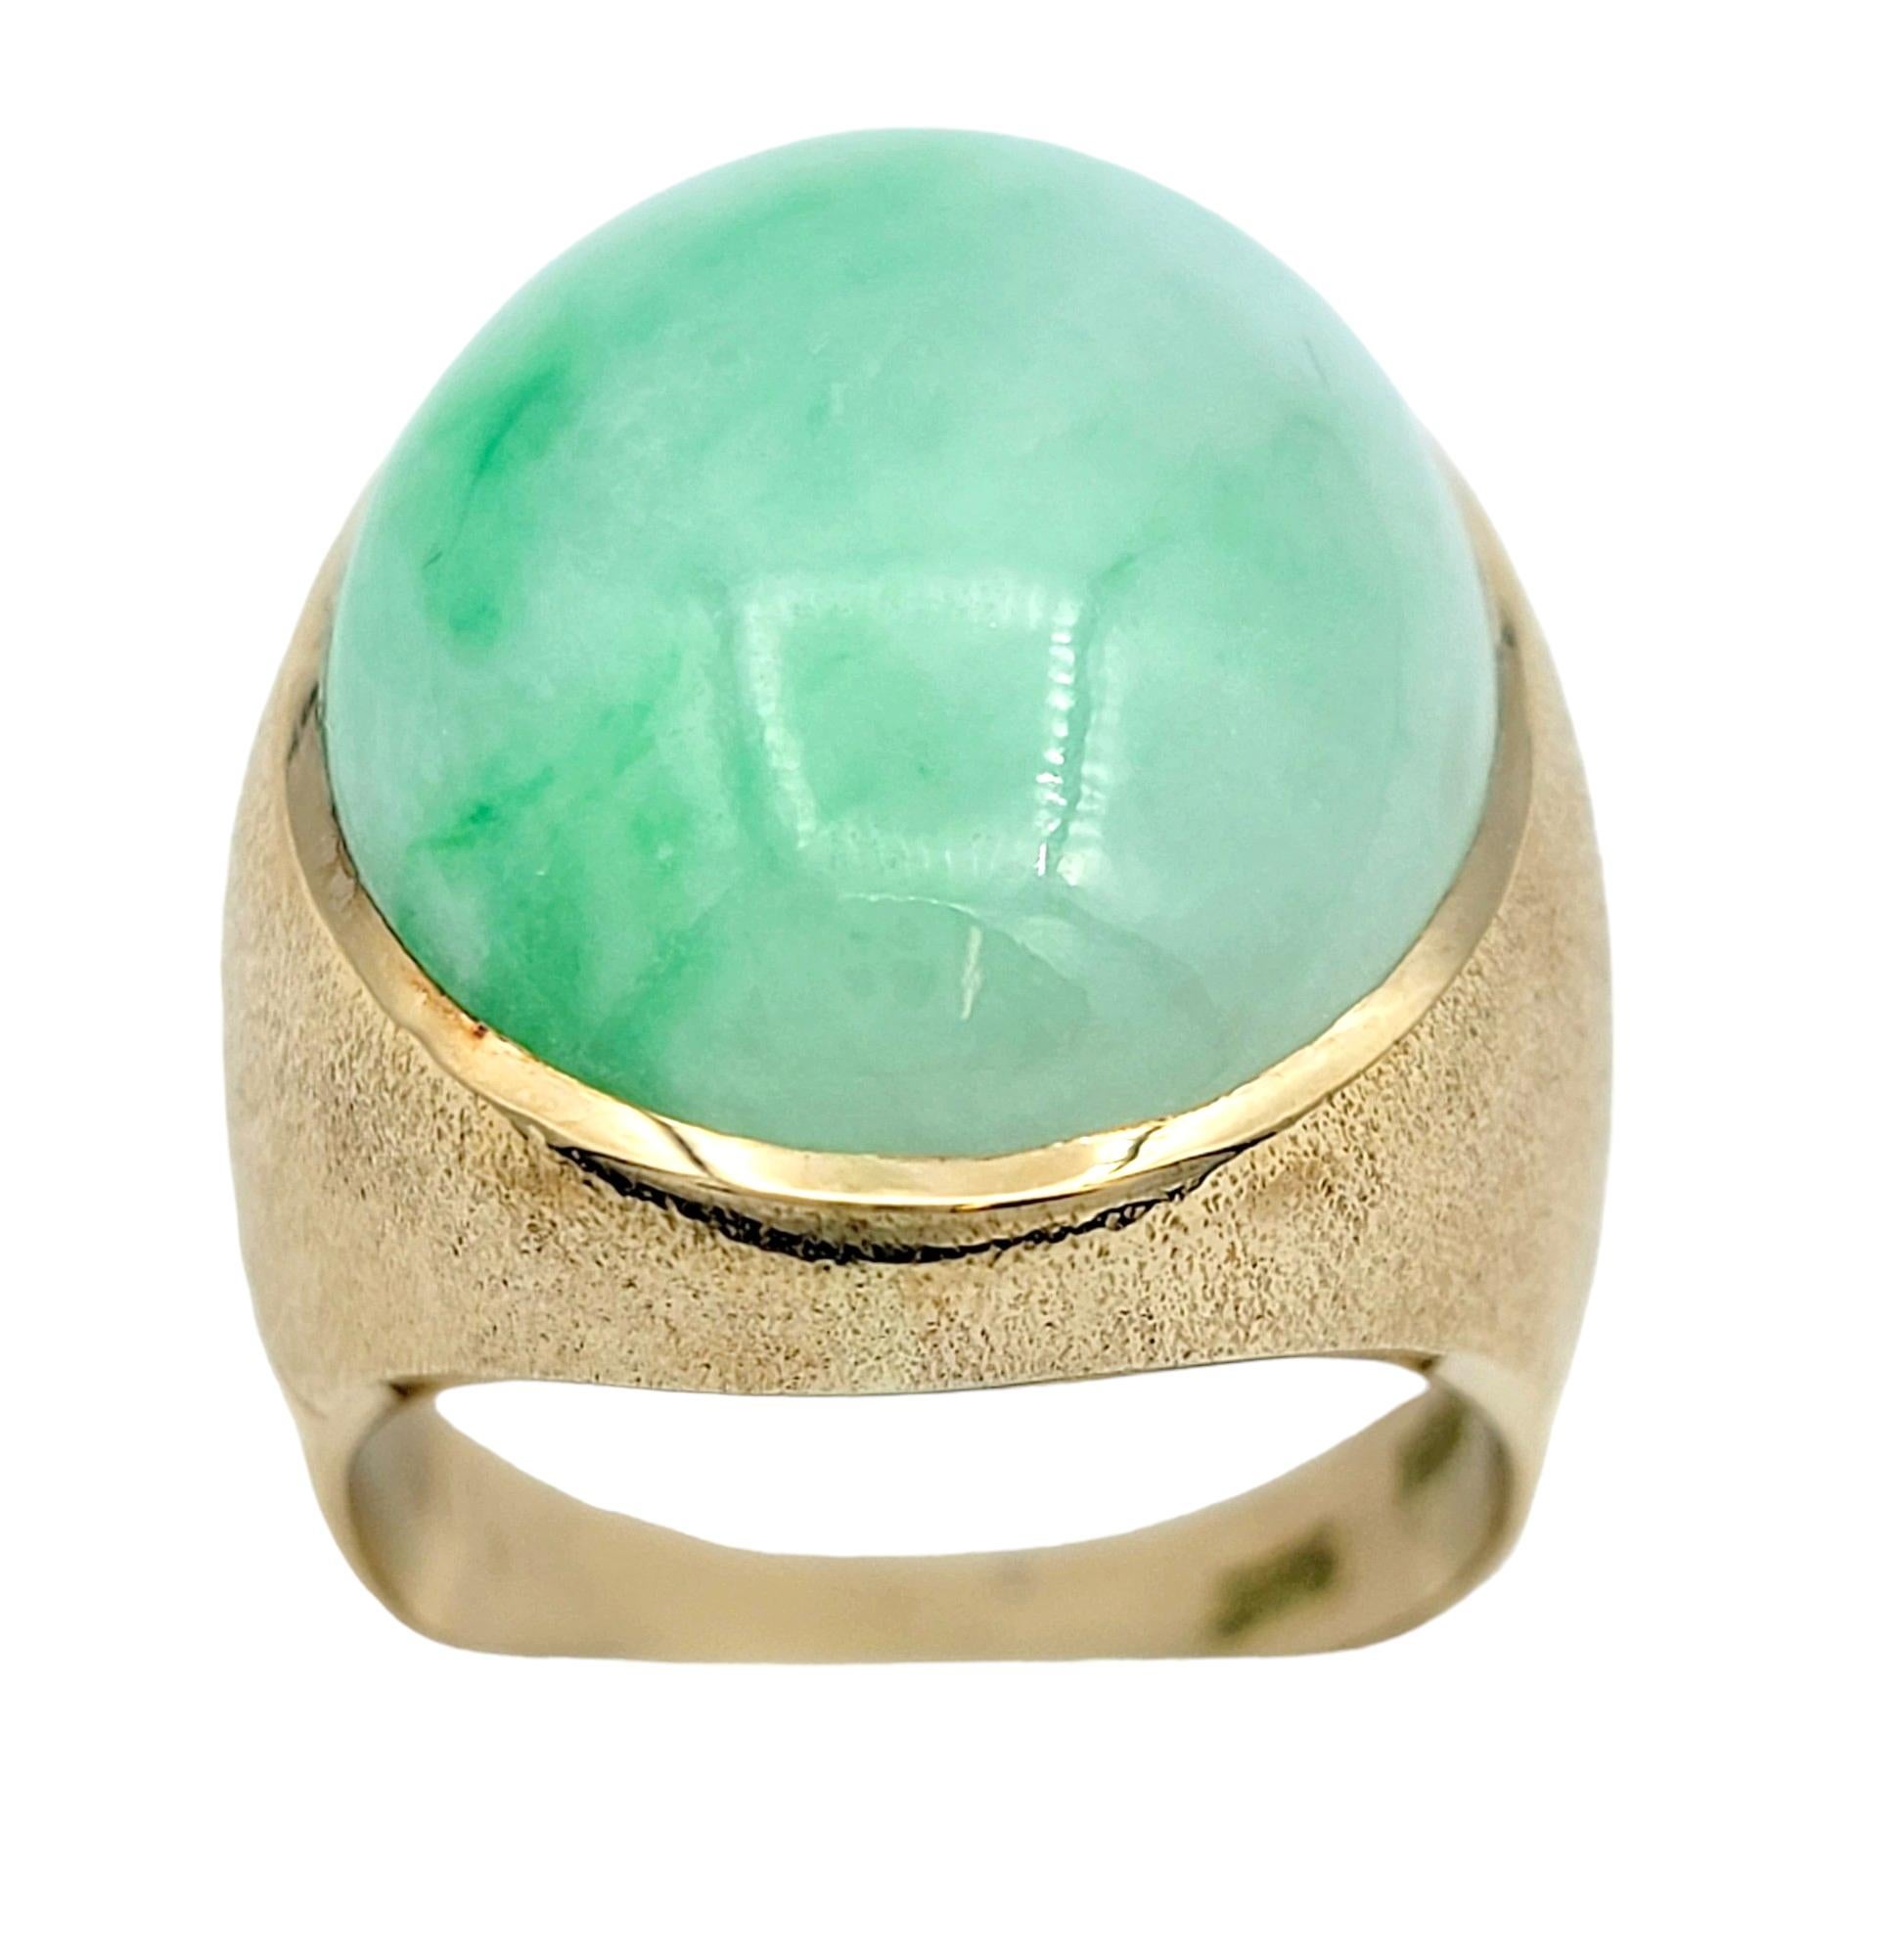 Contemporary 29.40 Carat Solitaire Oval Cabochon Green Nephrite Jade Ring in Yellow Gold For Sale